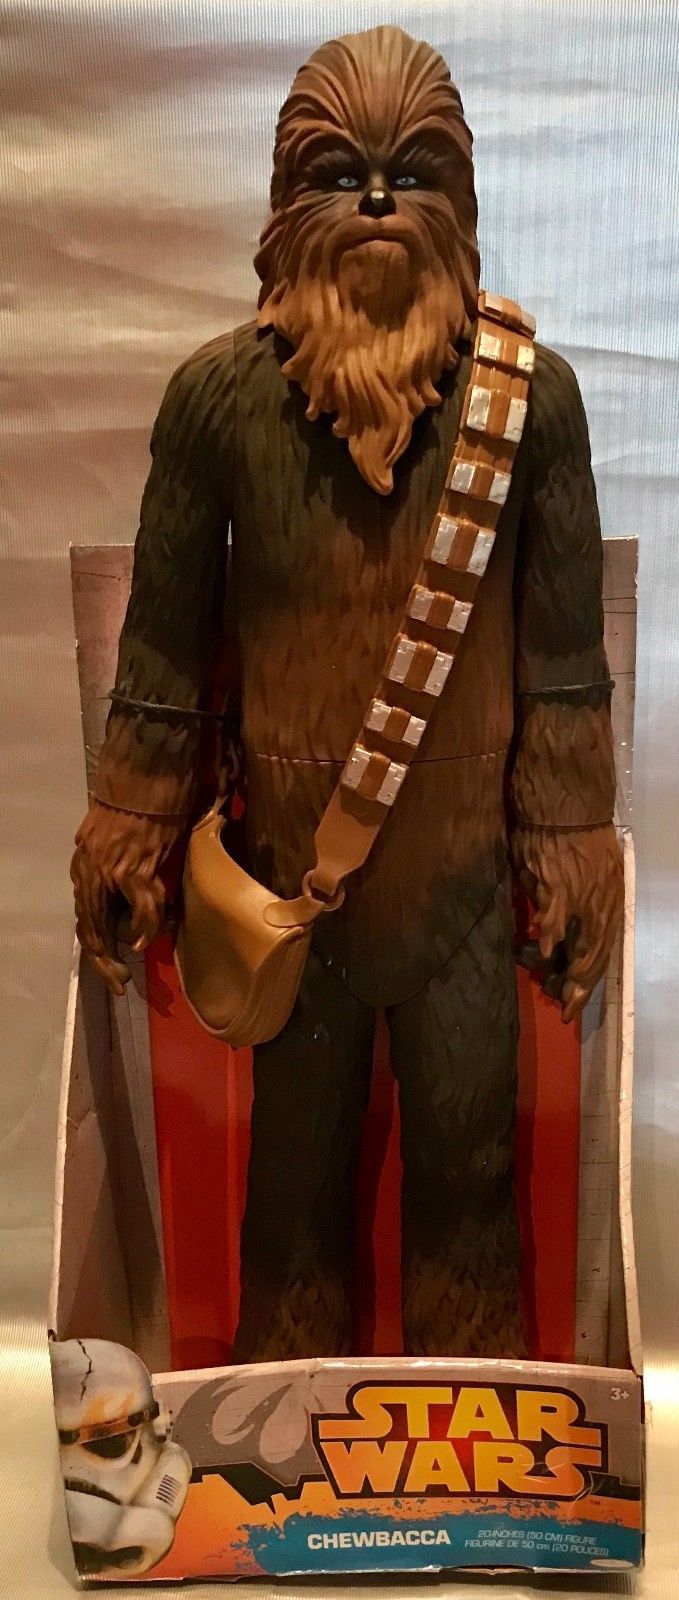 Primary image for Star Wars CHEWBACCA w/ Bandolier 20" Articulated Action Figure 2014 NEW